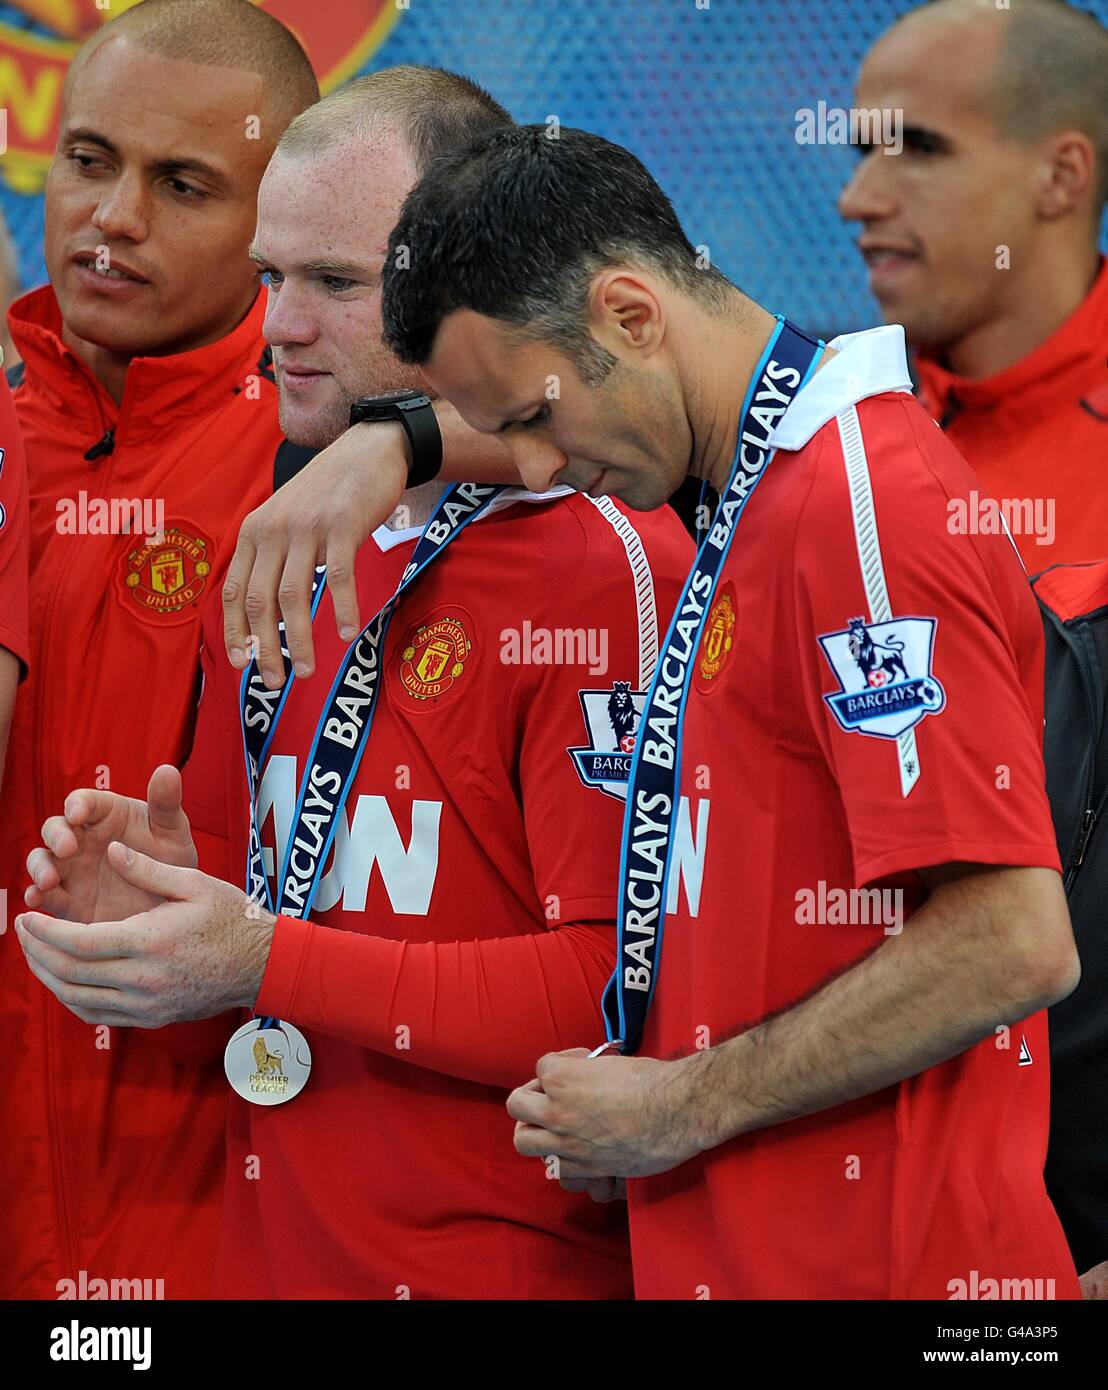 Soccer - Barclays Premier League - Manchester United v Blackpool - Old Trafford. Manchester United's Wayne Rooney (left) and Ryan Giggs with their Premier League winner's medals Stock Photo